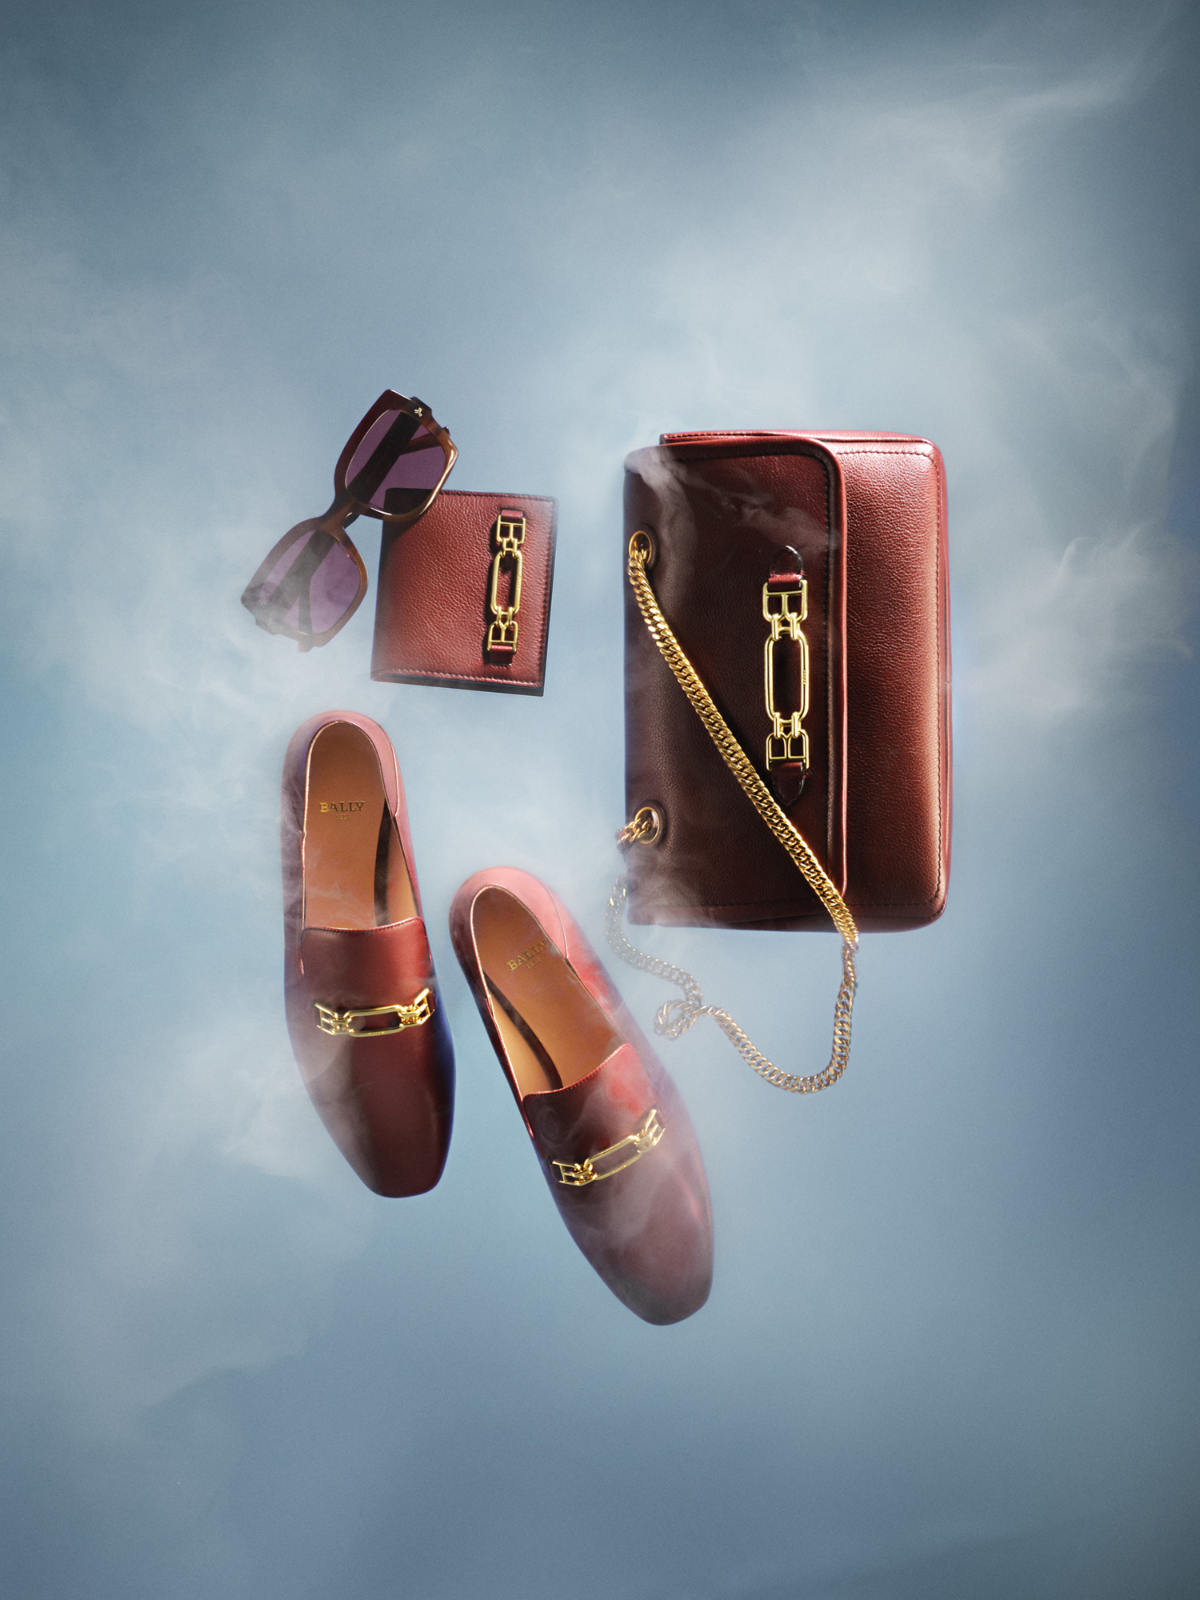 Bally: Holiday Gift Guide 2021